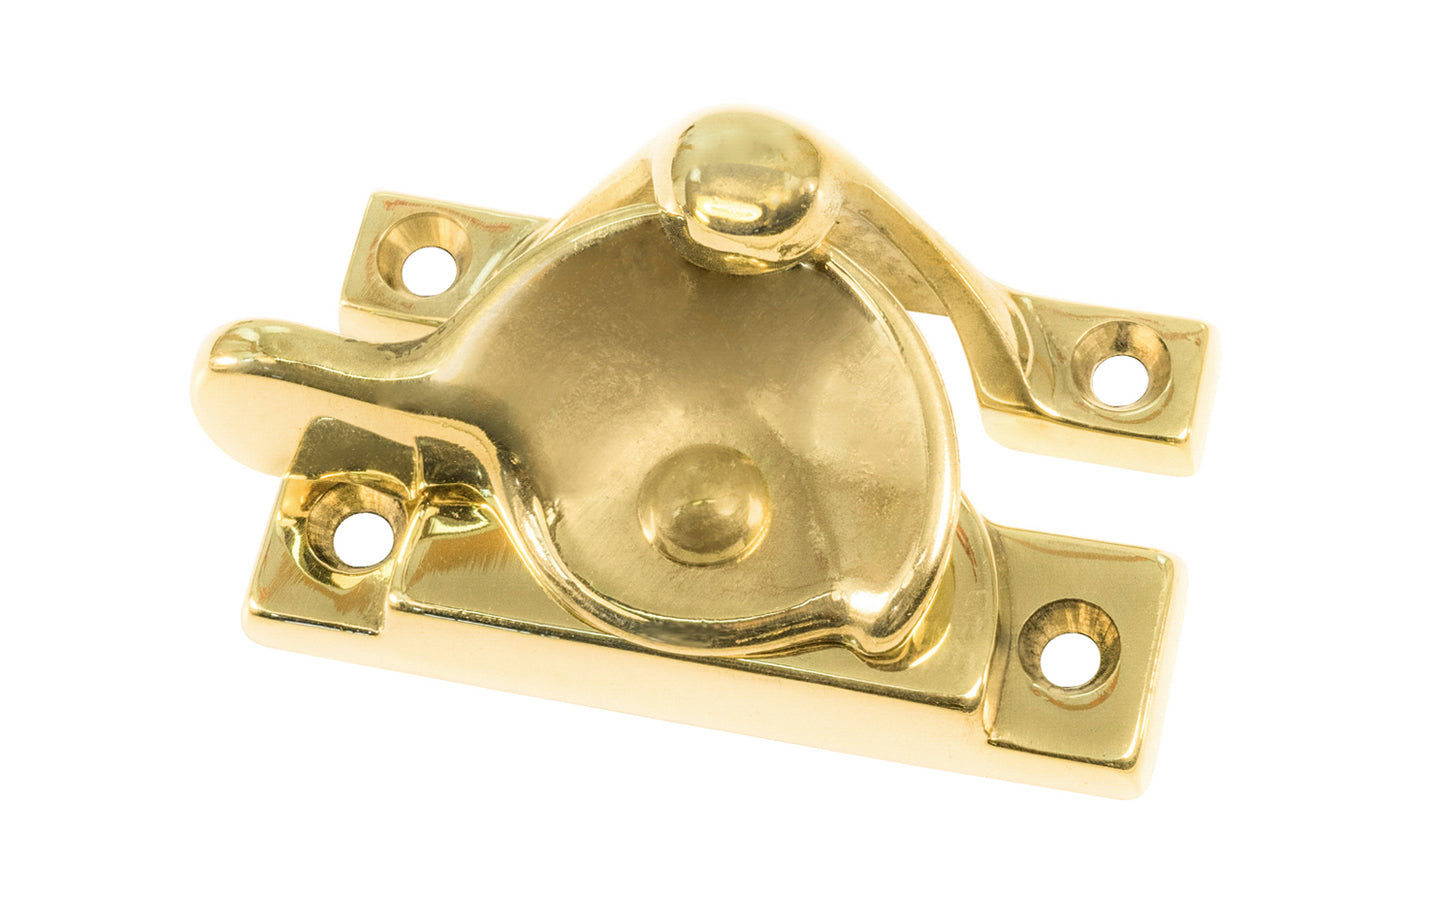 High quality classic solid brass crescent-style sash lock with square corners designed for hung or sash windows. Solid brass material with a durable pivot turn. 2-1/2" x 1" Size Lock. Lacquered Brass Finish.